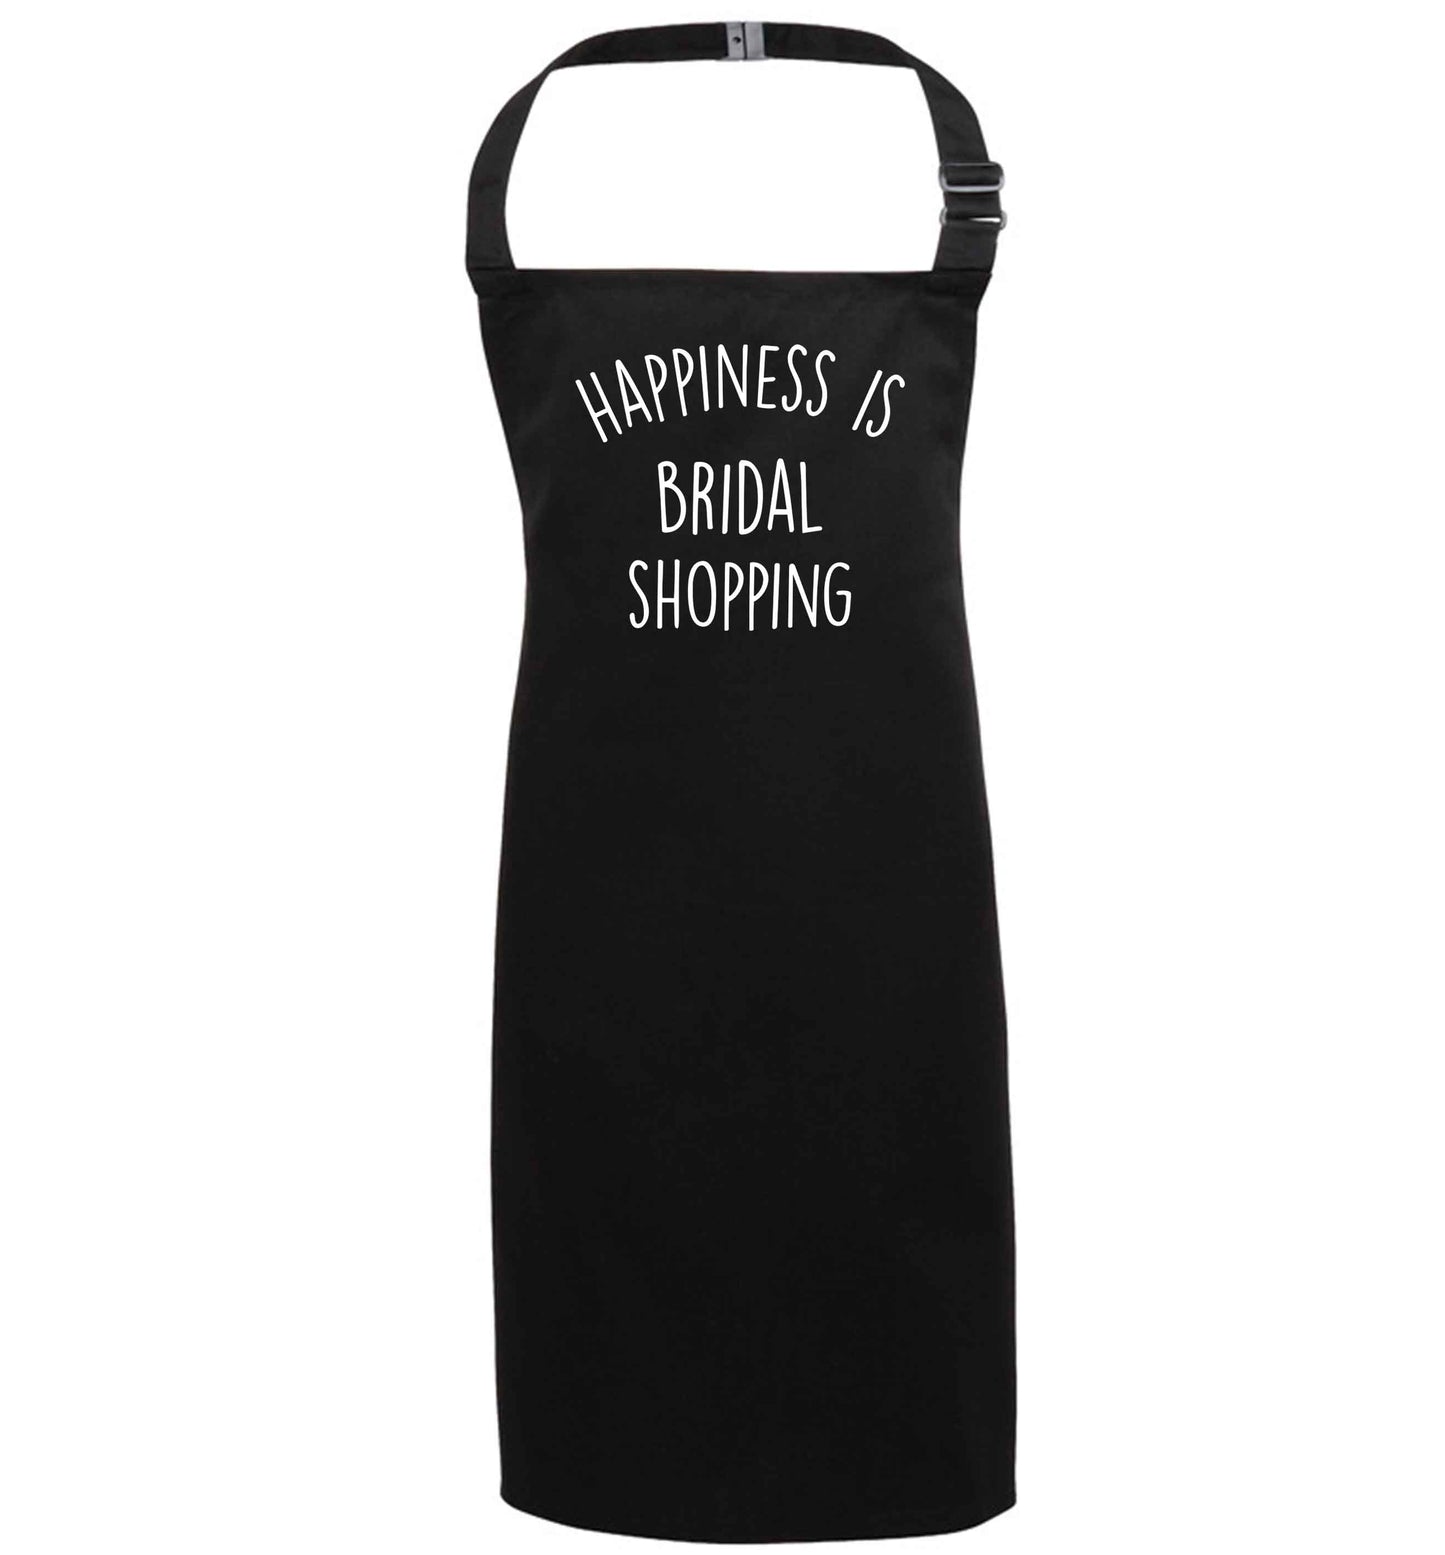 Happiness is bridal shopping black apron 7-10 years